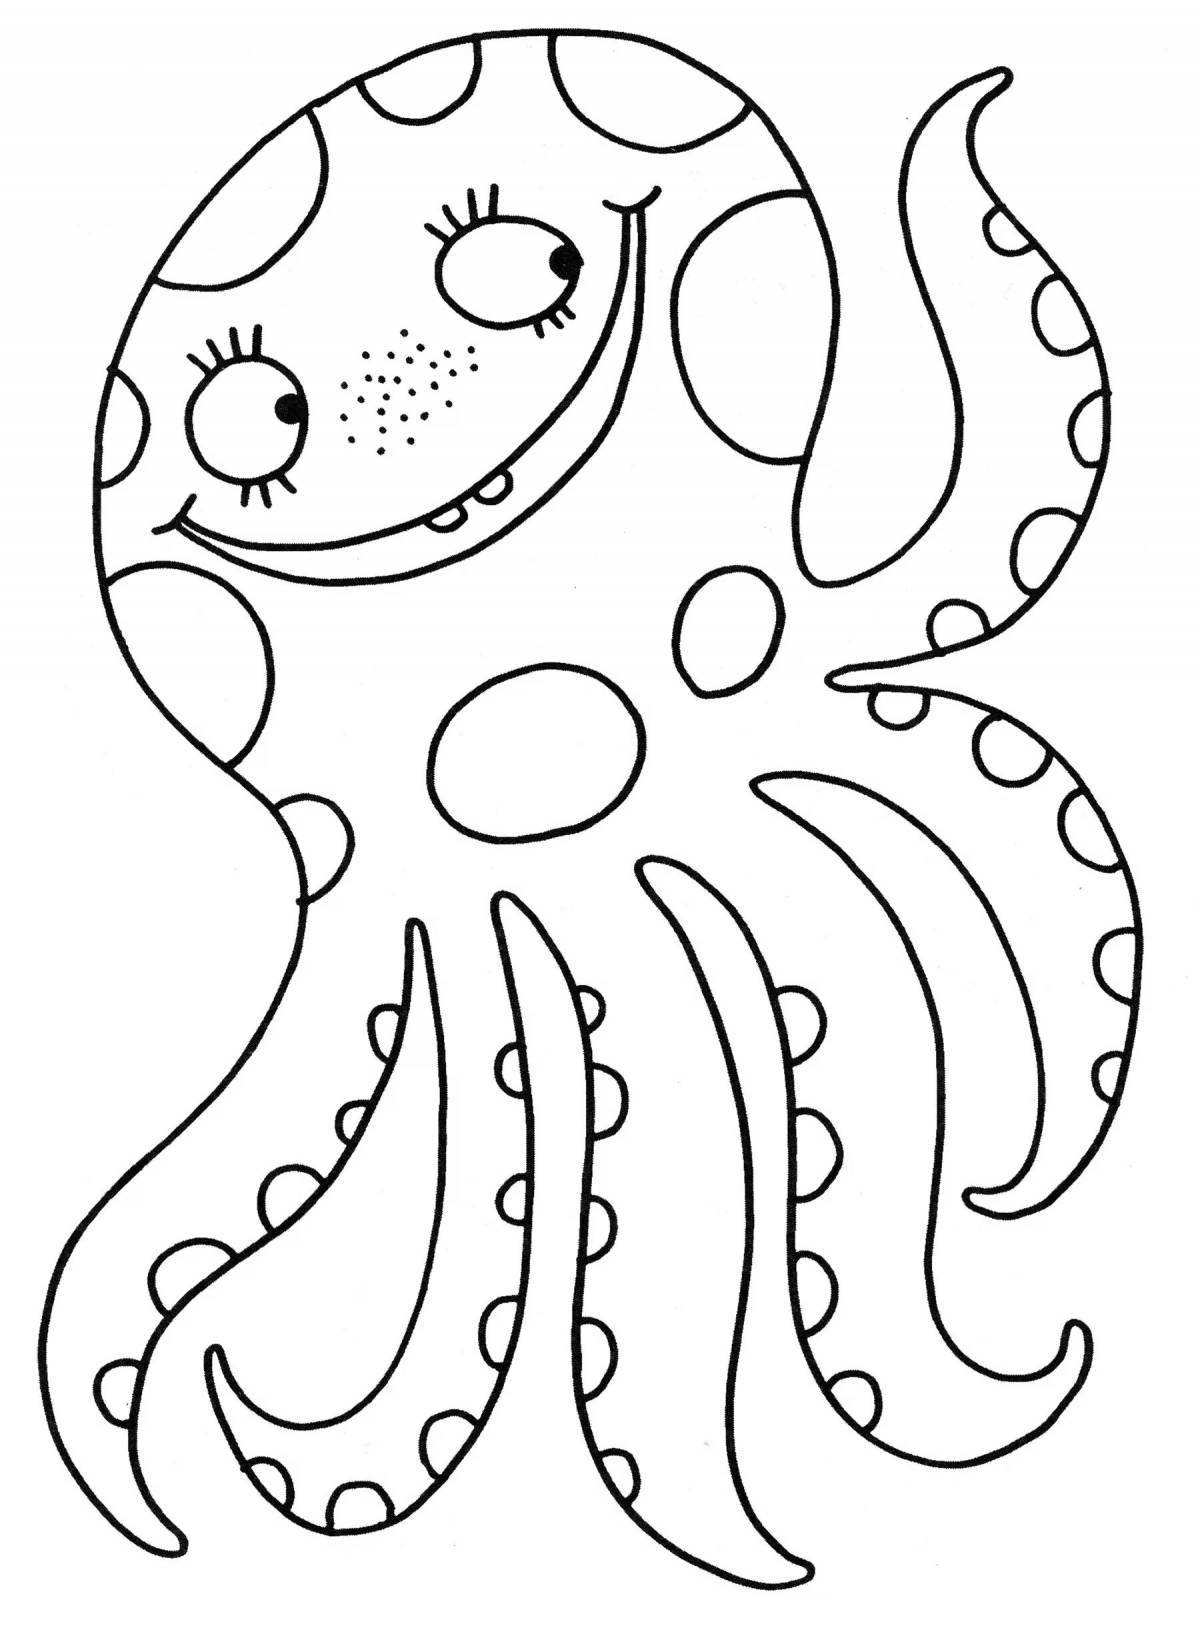 Cute octopus coloring pages for kids